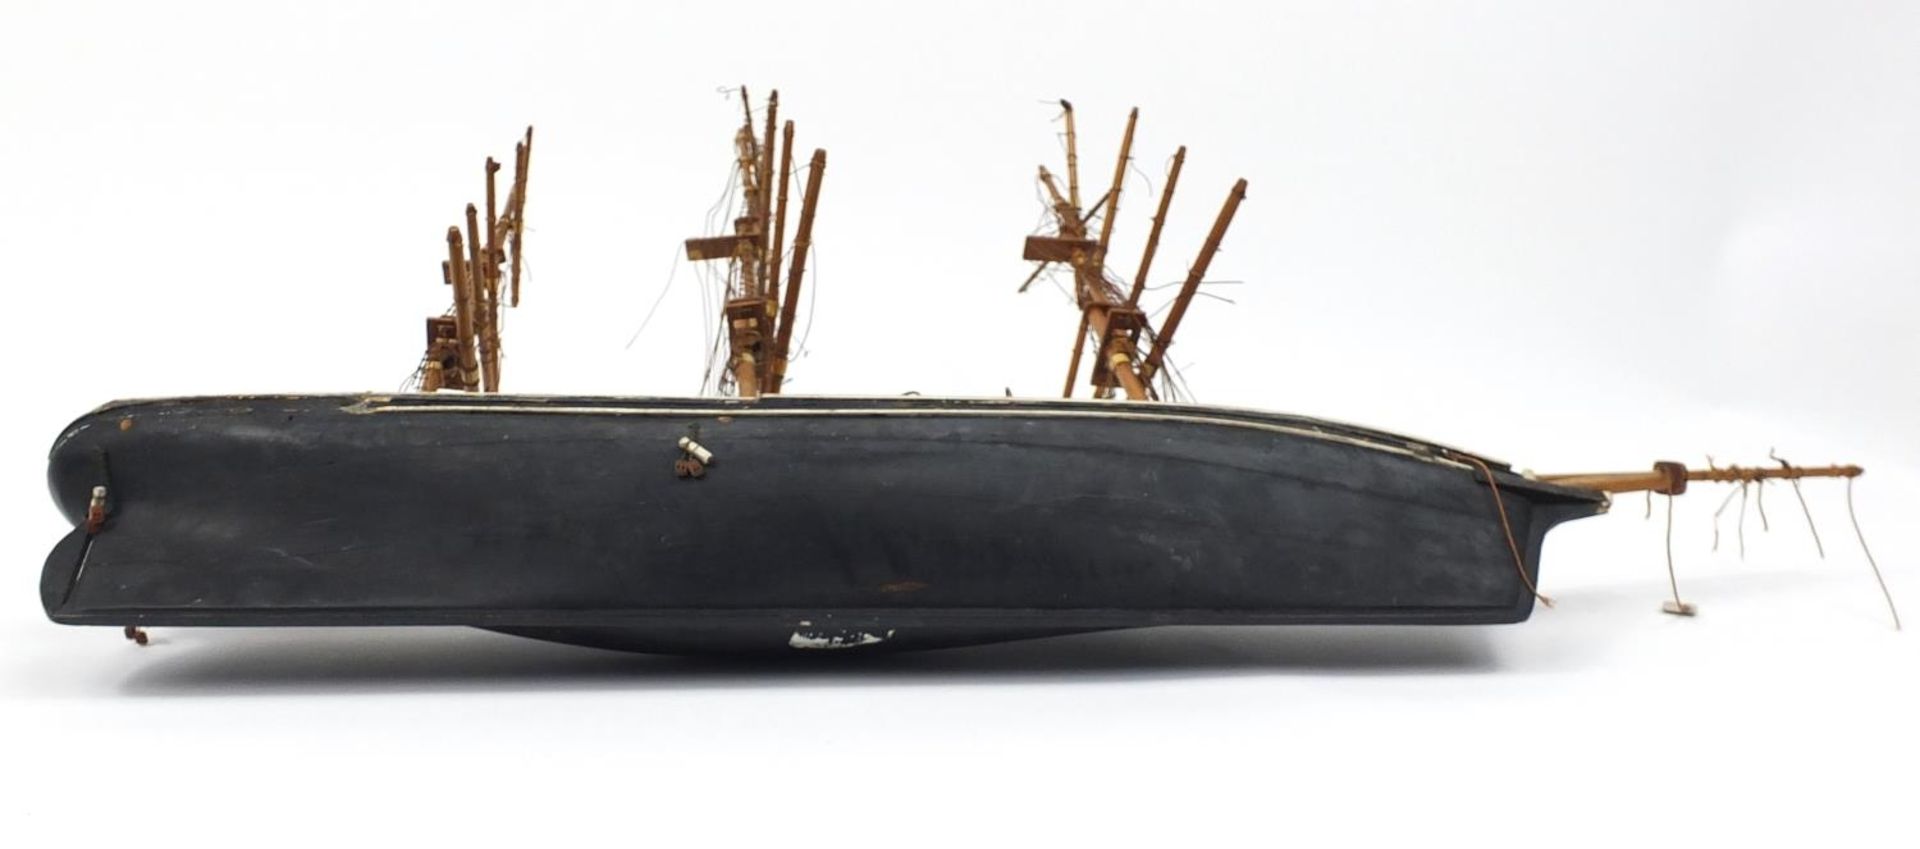 Hand painted wooden model of a rigged sailing ship, 73cm in length - Image 3 of 3